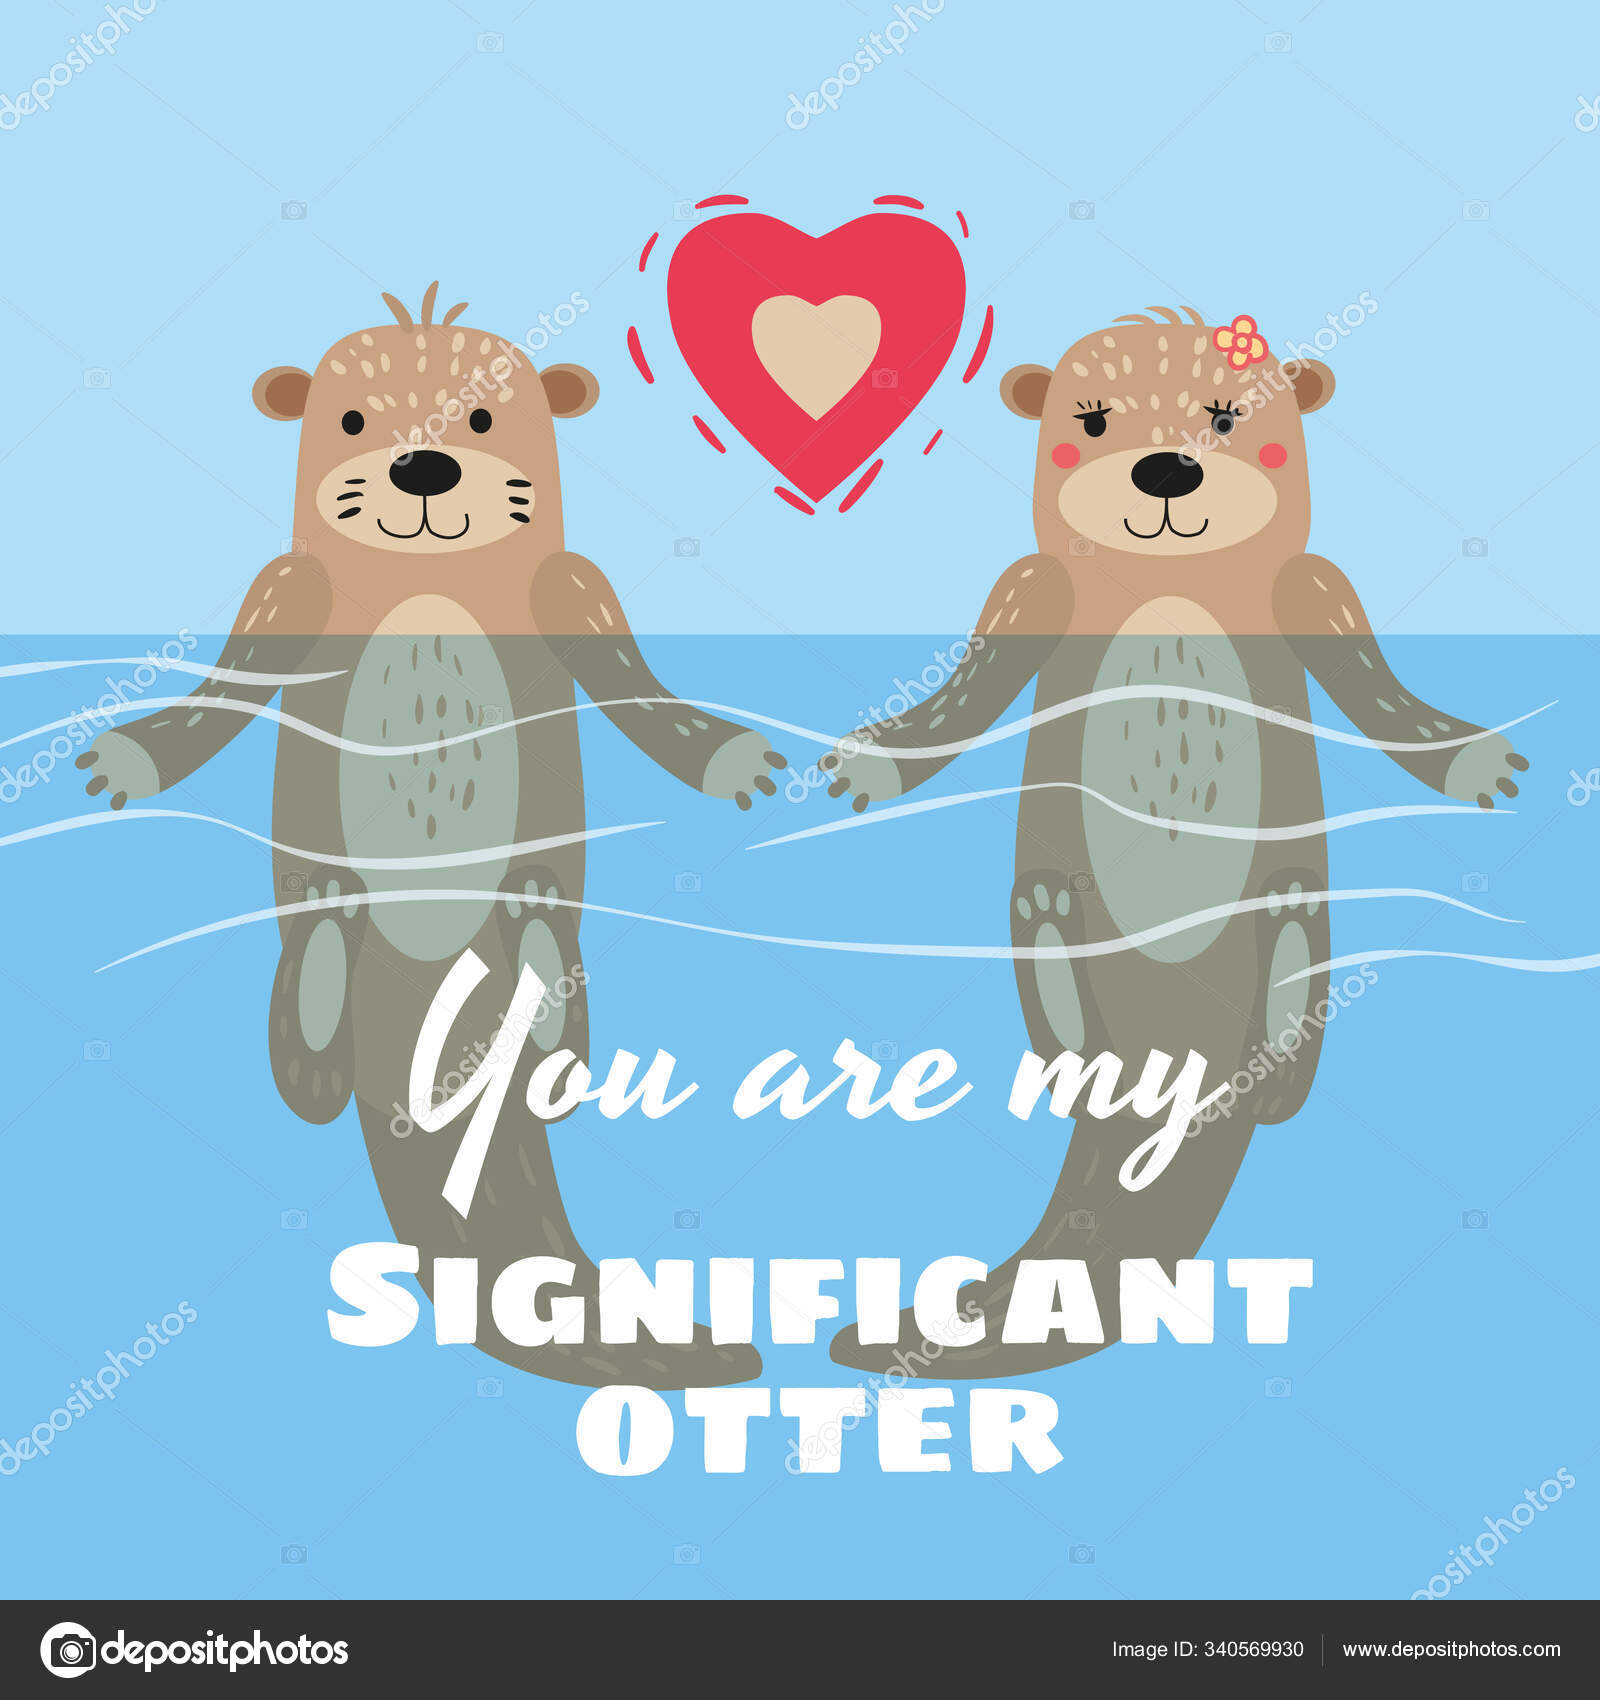 Significant Otter Valentines Day greeting card. Cute otter couple